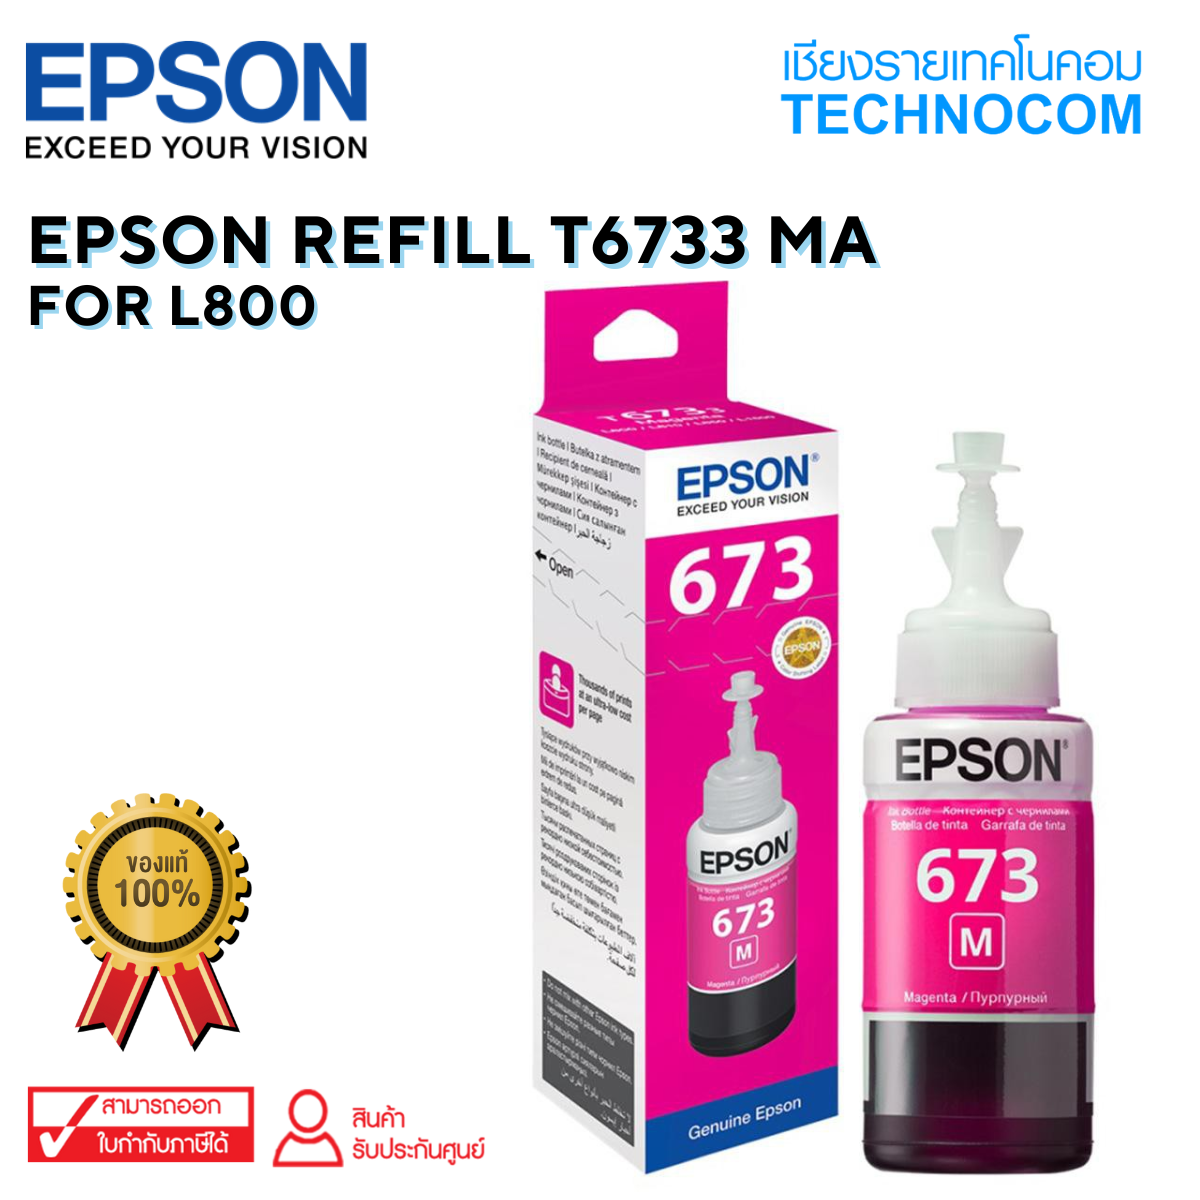 EPSON REFILL T6733 MA For L800